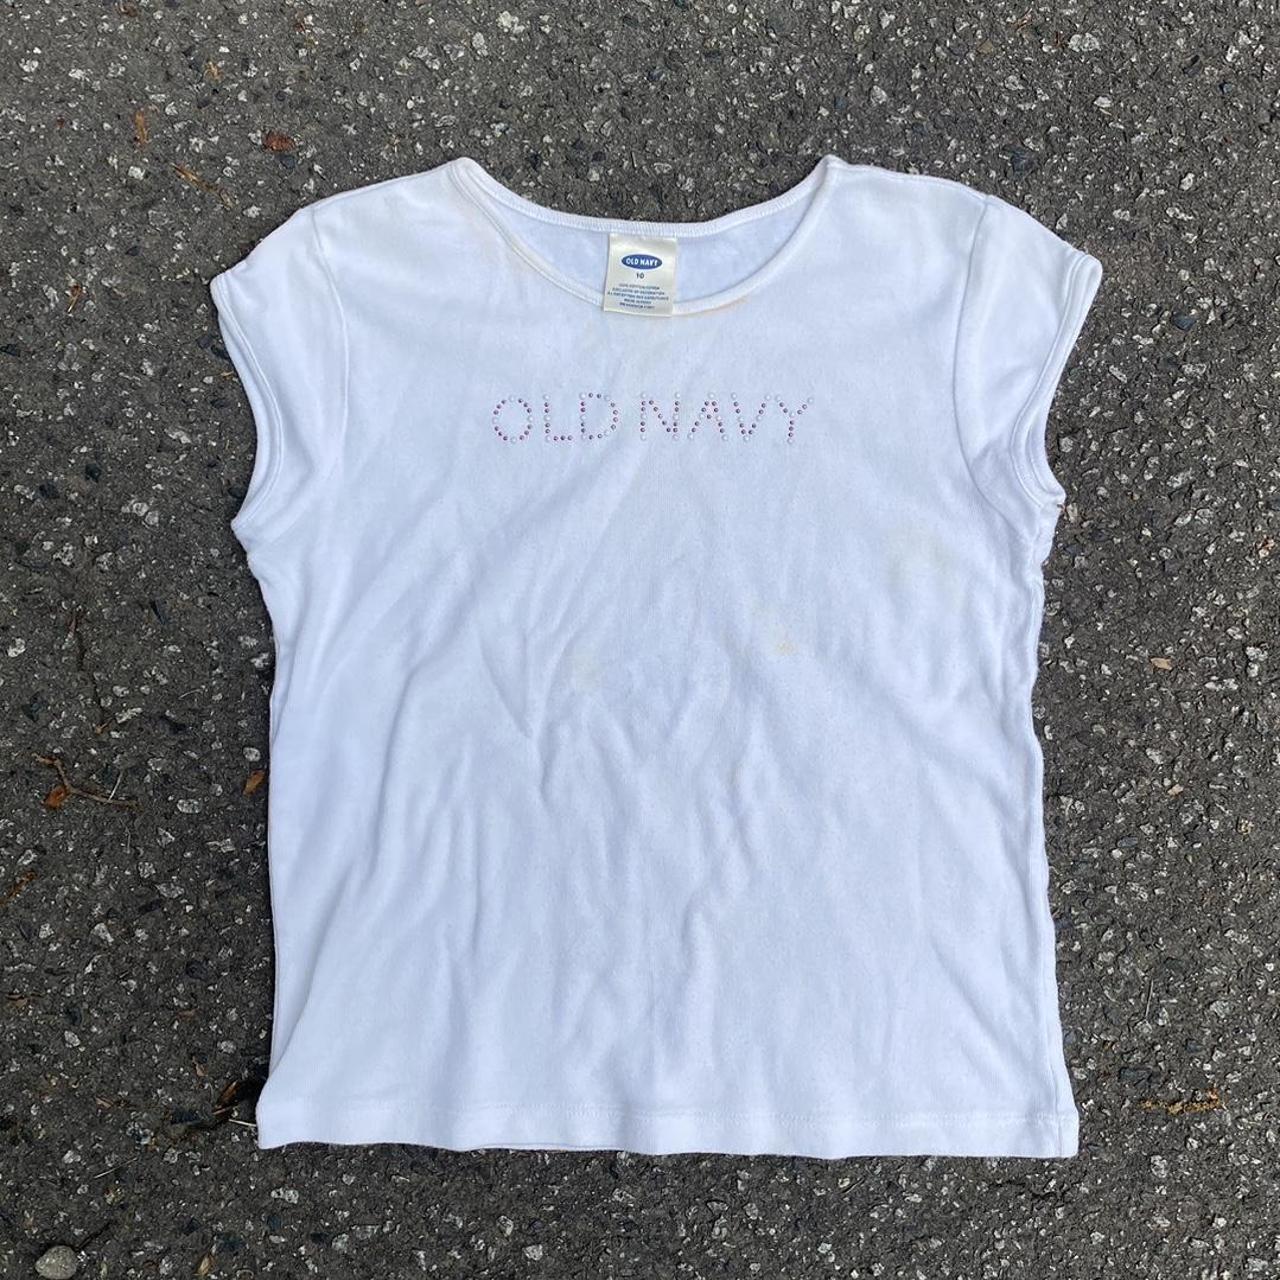 Old Navy Women's White and Pink T-shirt | Depop